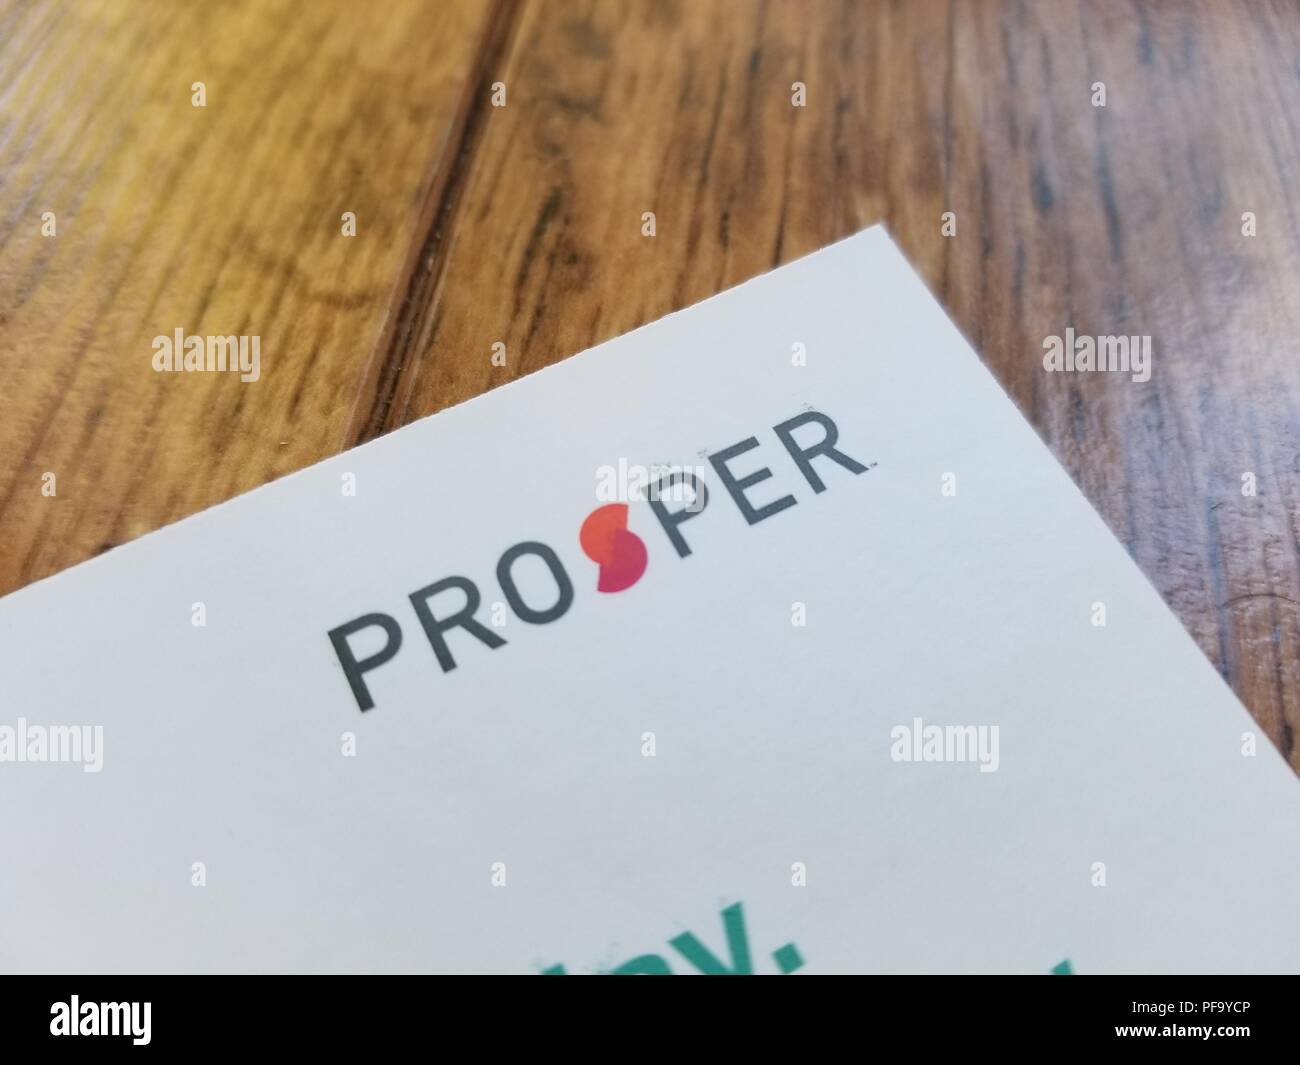 Close-up of logo for peer to peer lending company Prosper on a piece of white paper against a light wooden background, San Ramon, California, February 4, 2018 Stock Photo